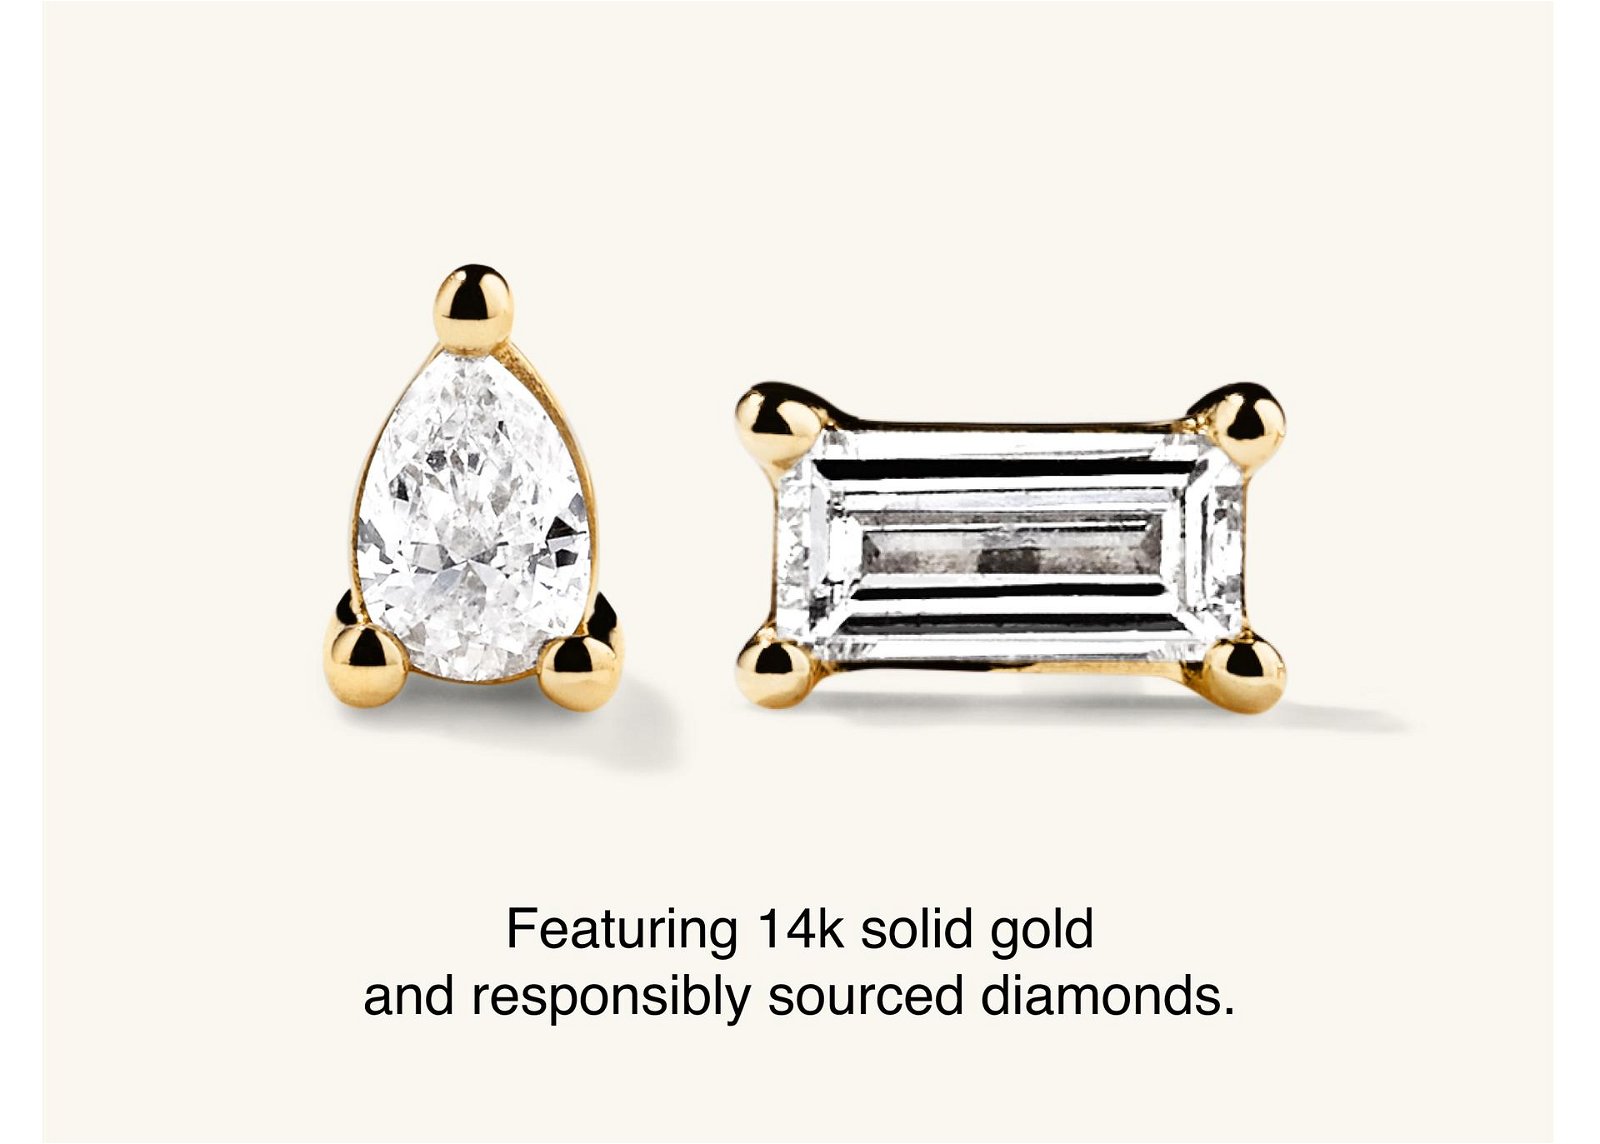 Featuring 14k solid gold and responsibly sourced diamonds.